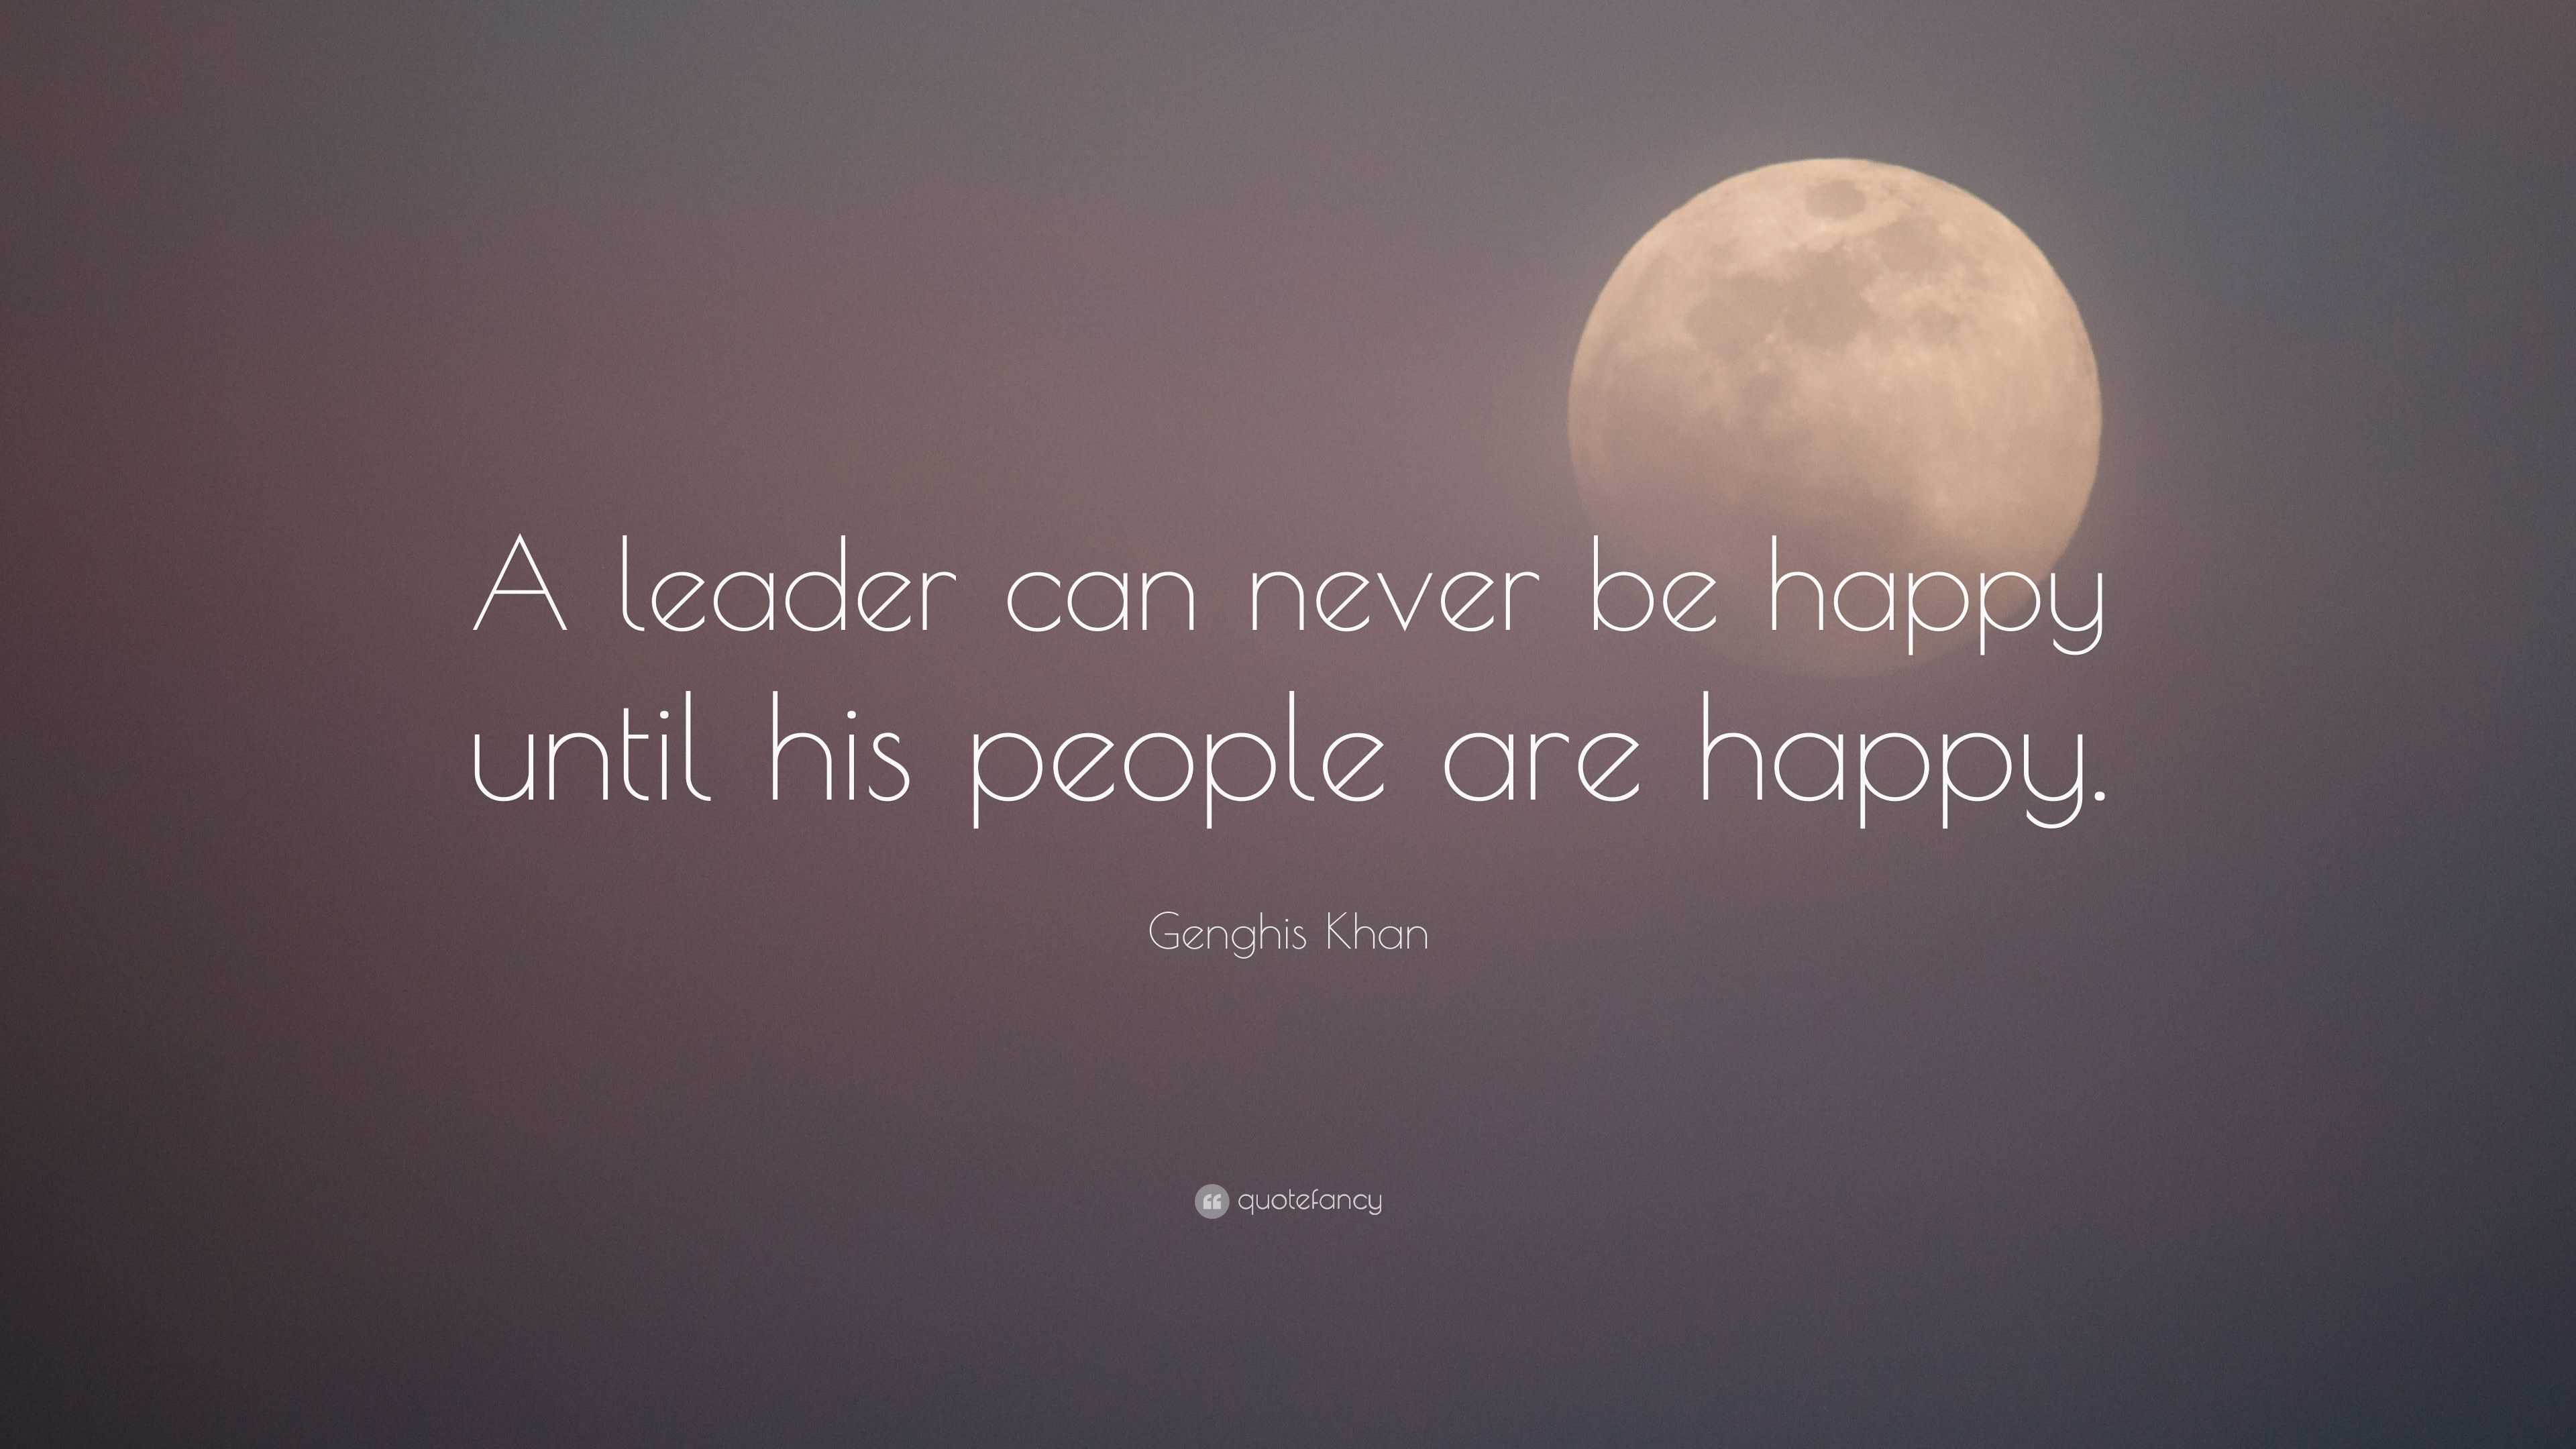 Genghis Khan Quote: “A leader can never be happy until his people are